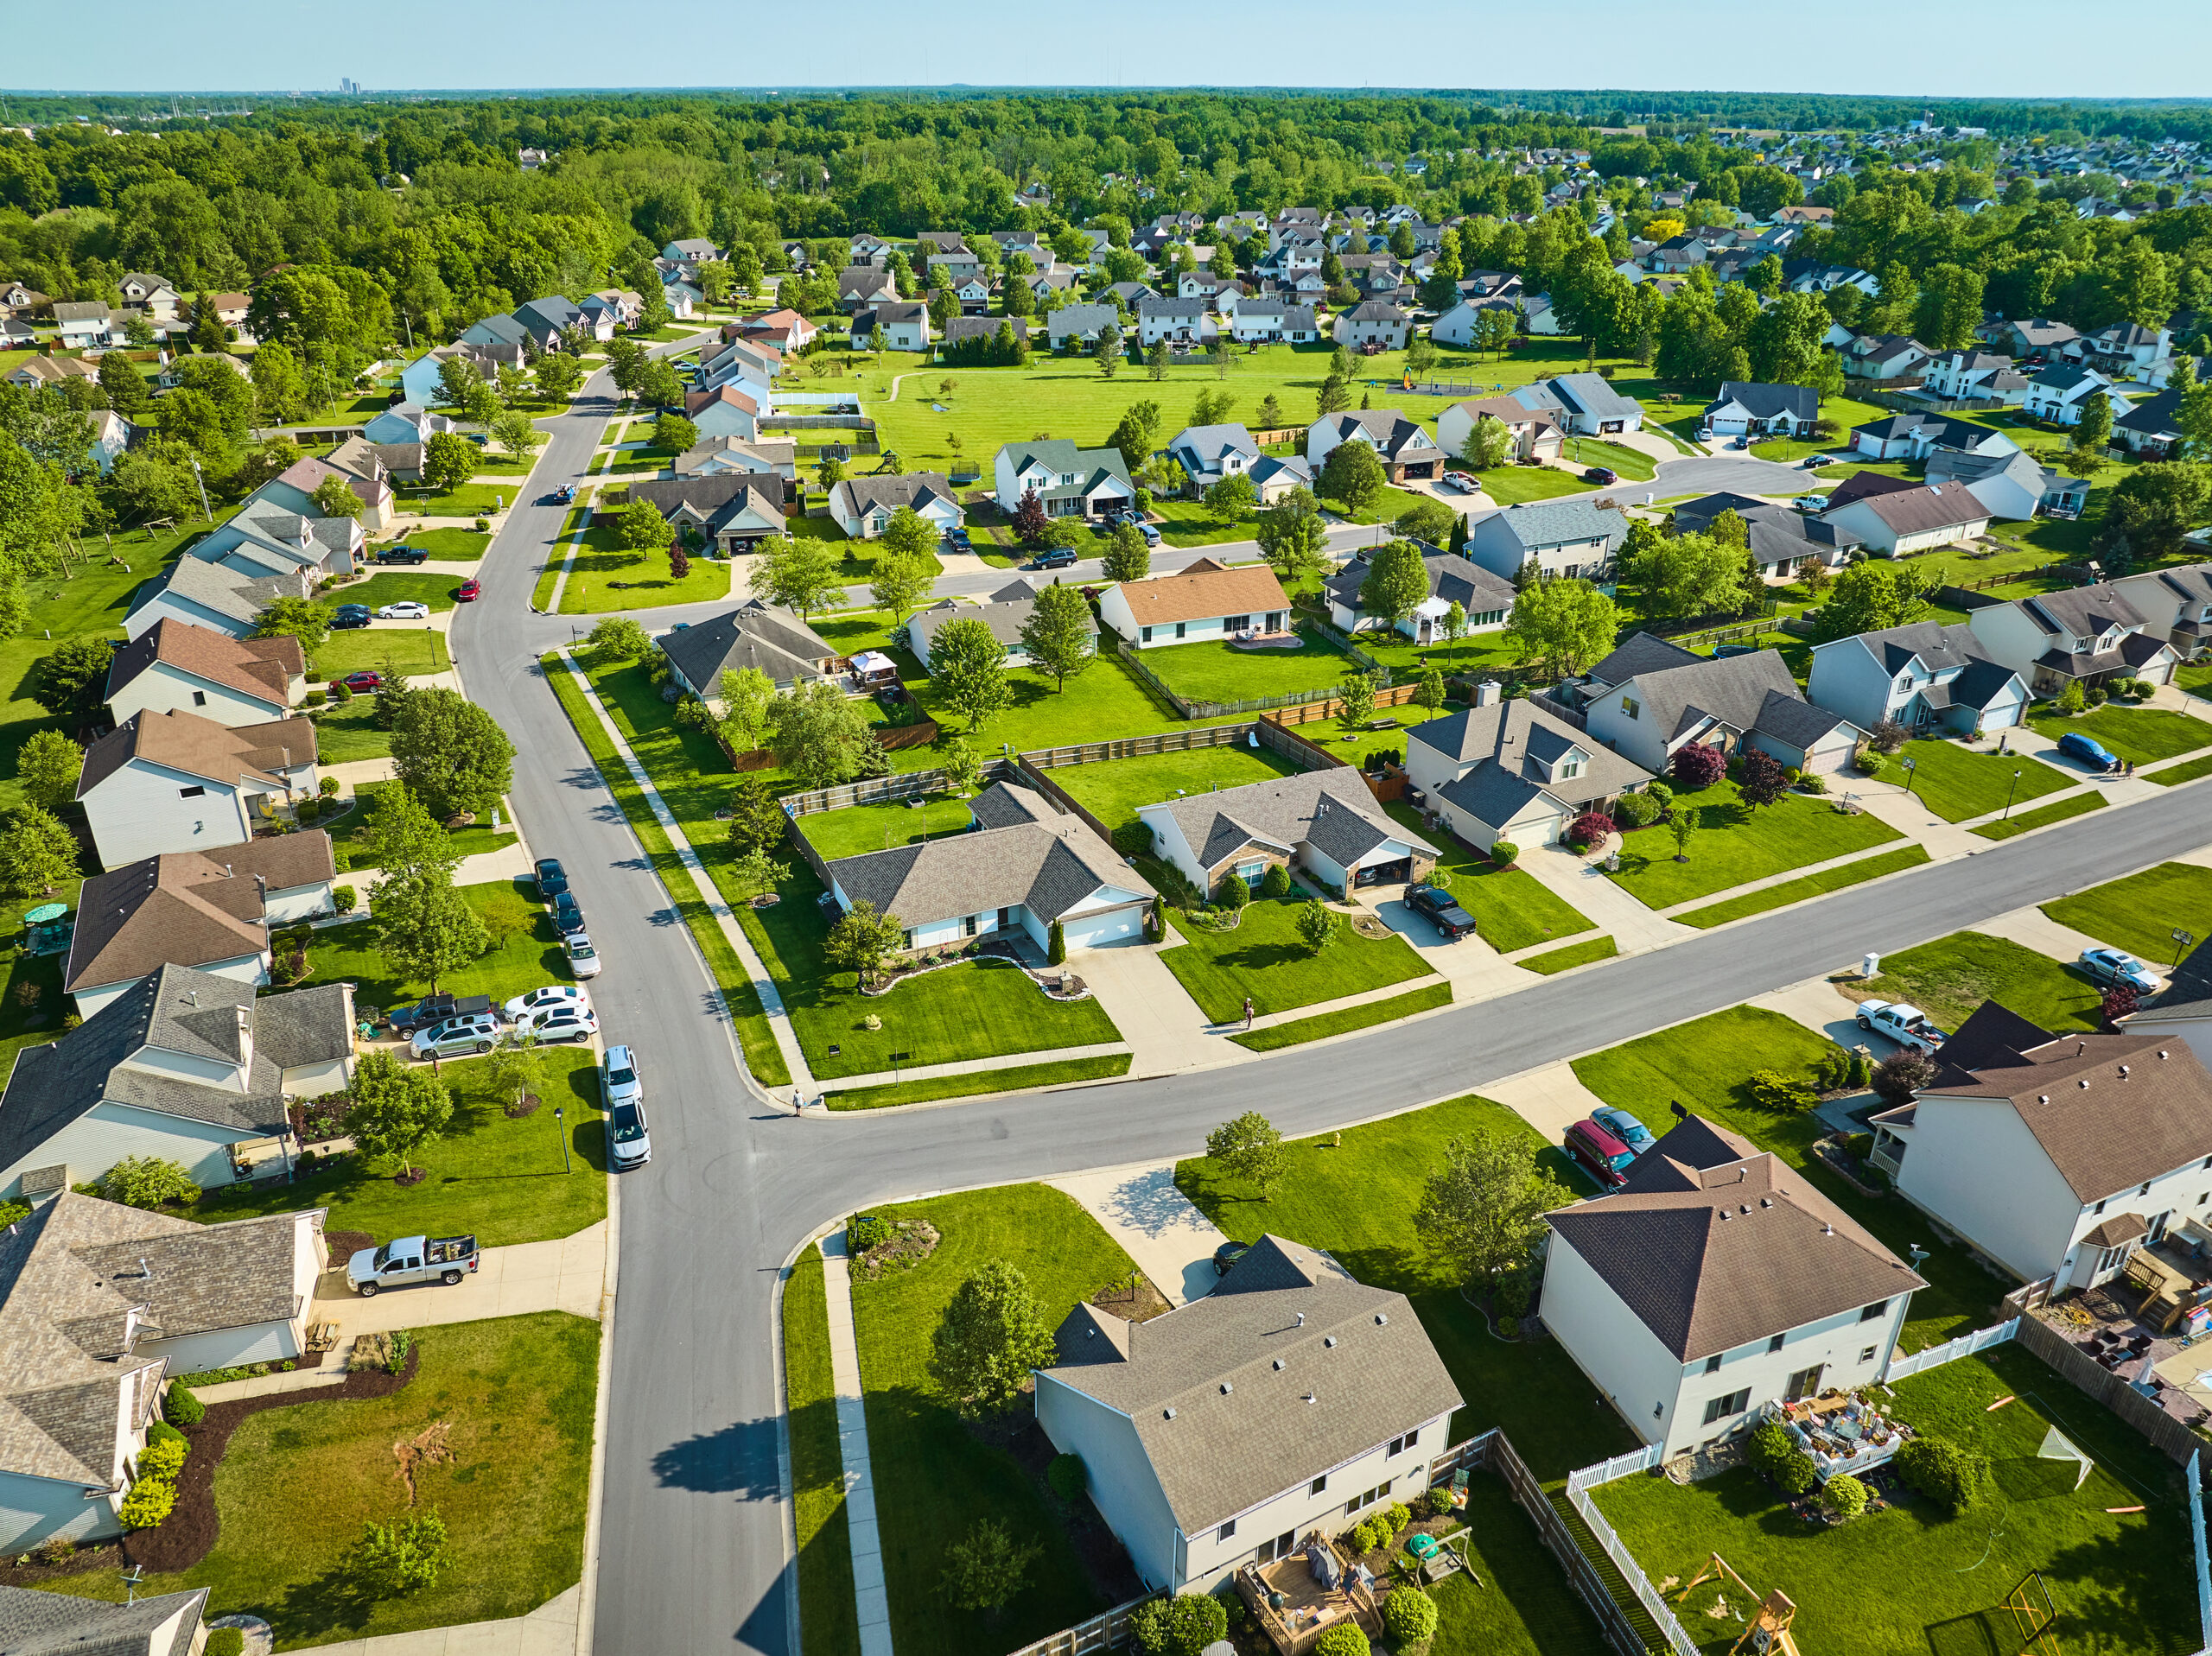 An aerial view of a neighborhood on a warm summer day, with green lawns in Sunnyvale, TX.